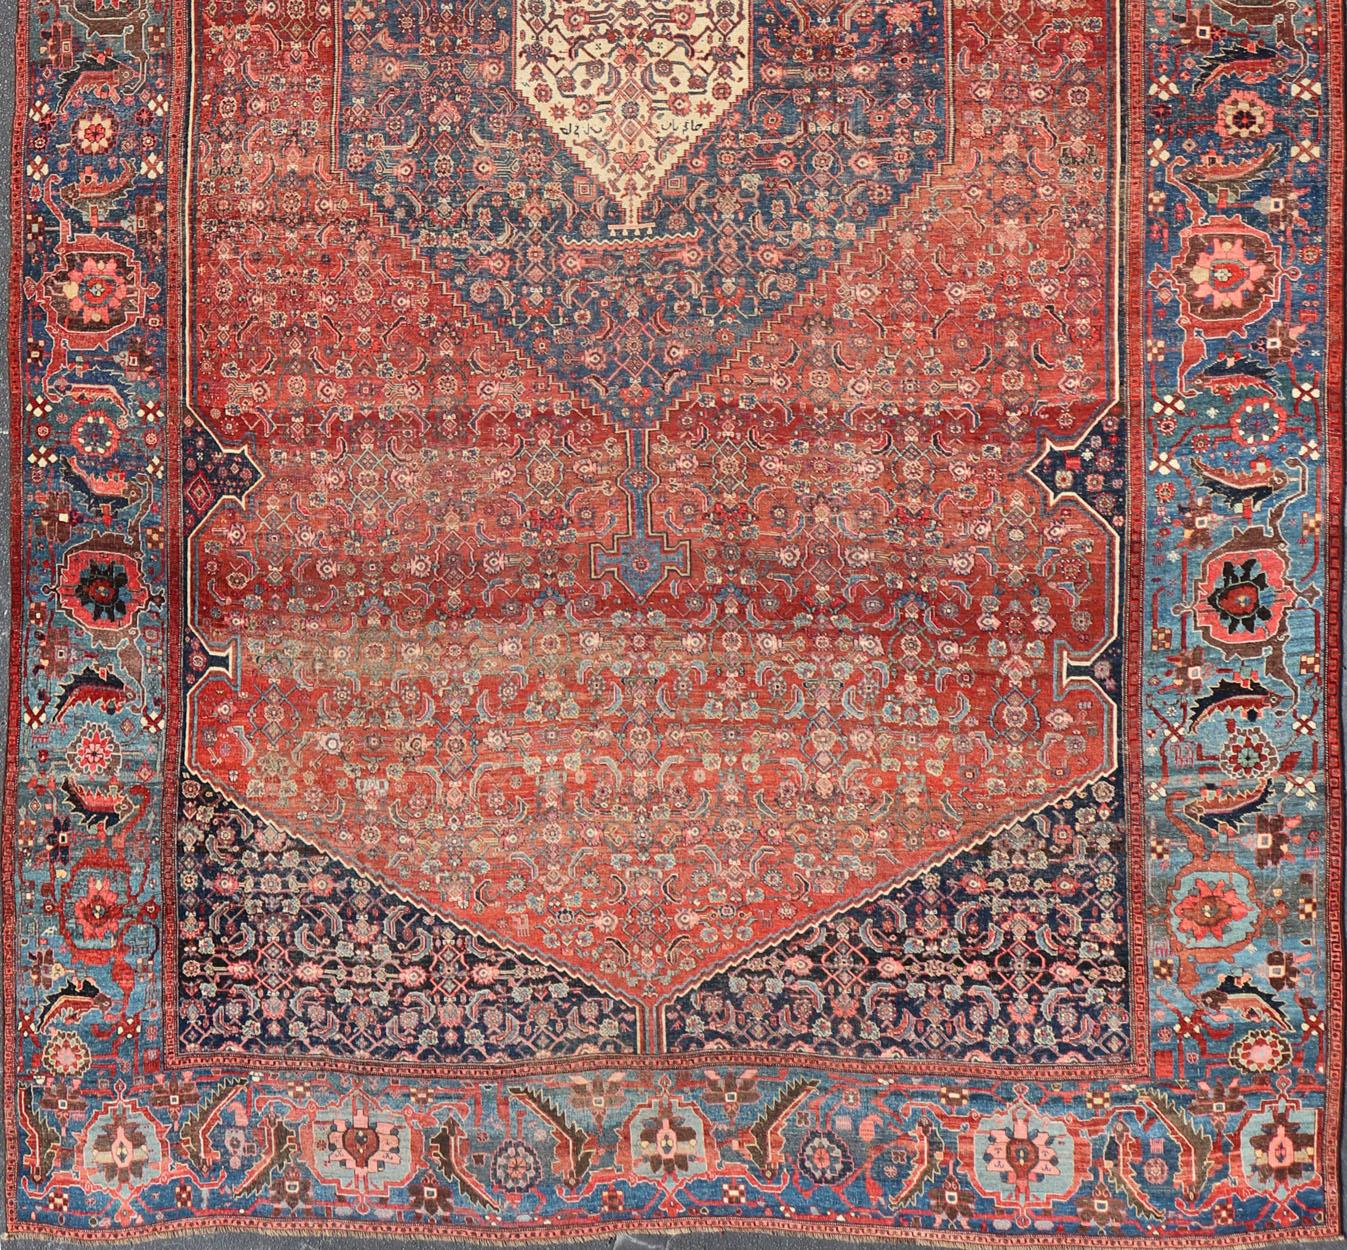 Hand-Knotted Very Large Antique Persian Bidjar Rug in Multi Shades of Blue, Tera-Cotta & Red For Sale